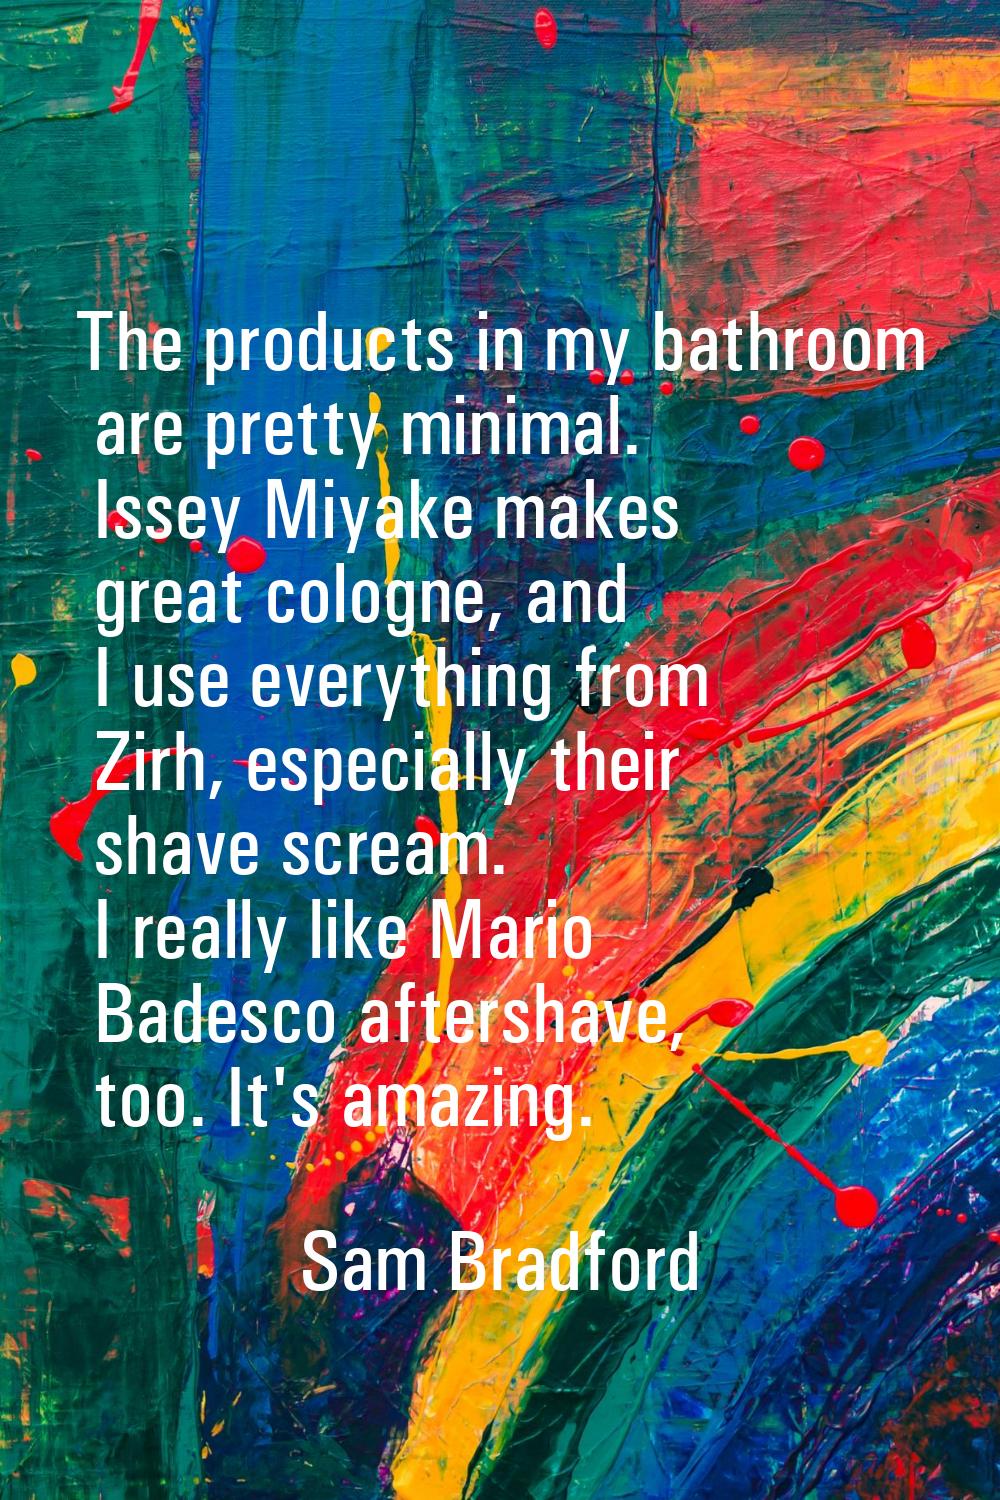 The products in my bathroom are pretty minimal. Issey Miyake makes great cologne, and I use everyth